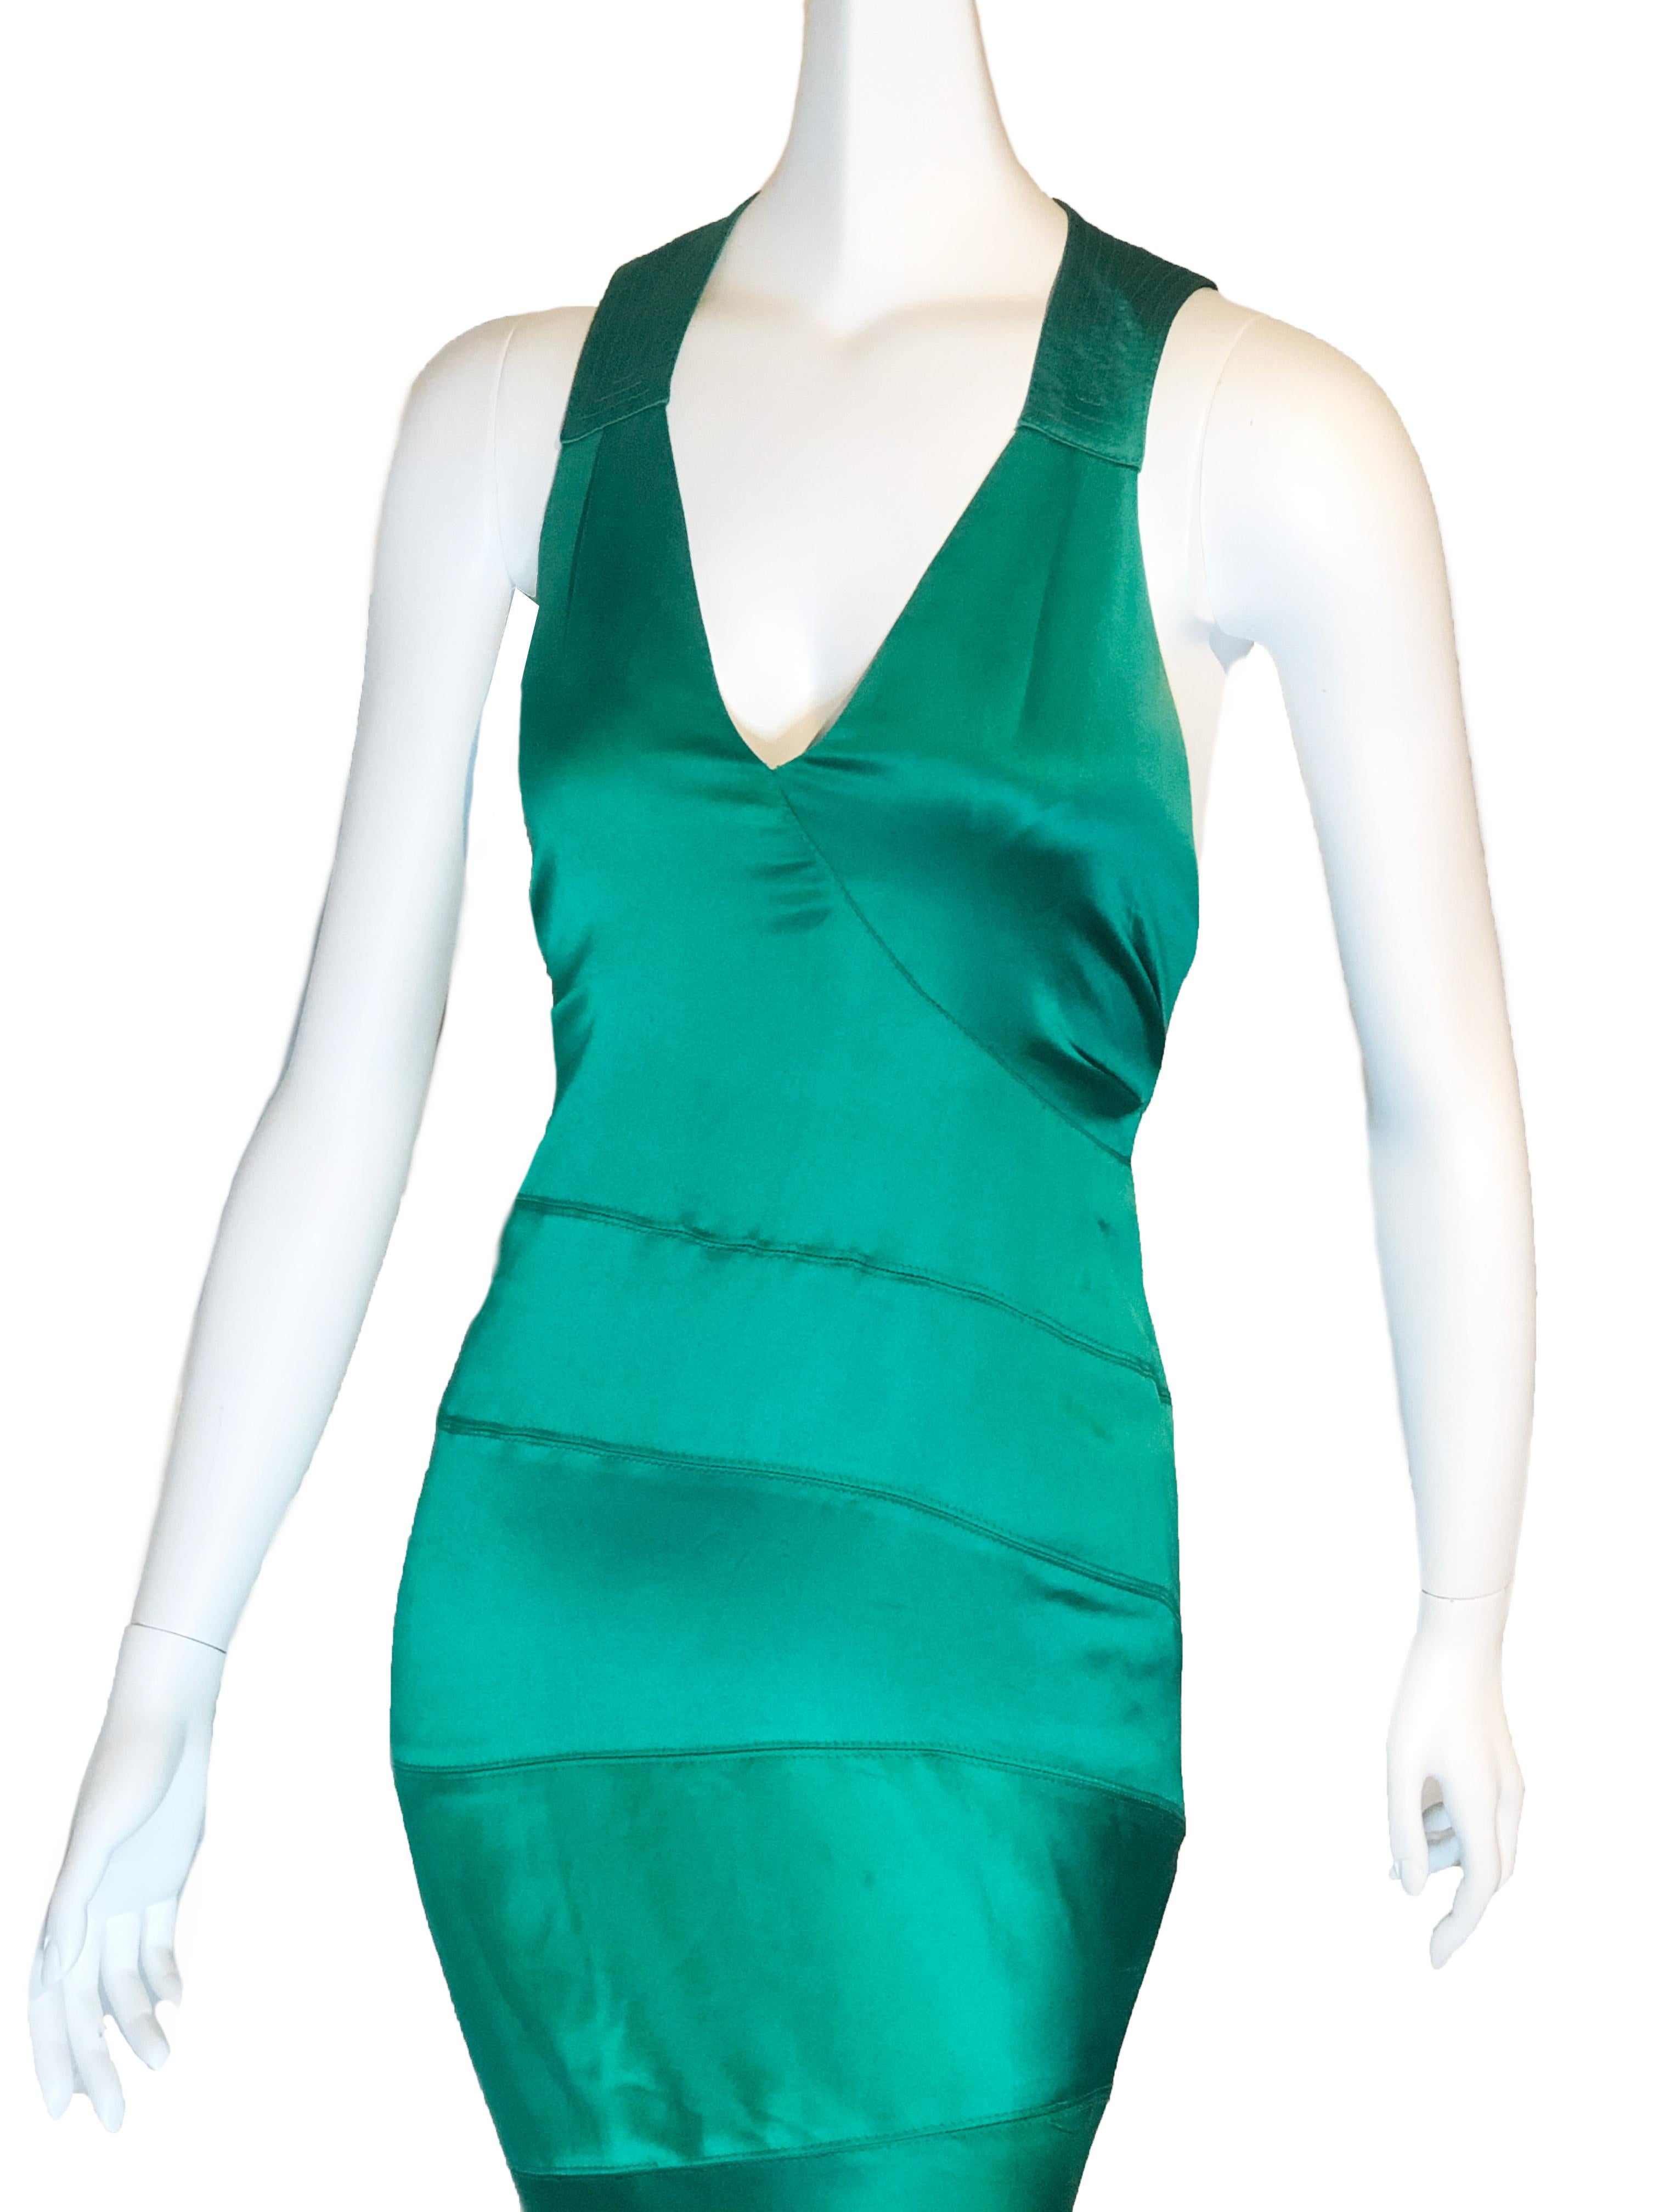 1990s Gianni Versace emerald green silk satin bias cut gown with clever seaming and trapunto stitched racer-back yolk. Fishtail flared hem. Marked Italian size 40. Classic.
Condition
BC. Good. Small discolored spots in places. Slight discoloration